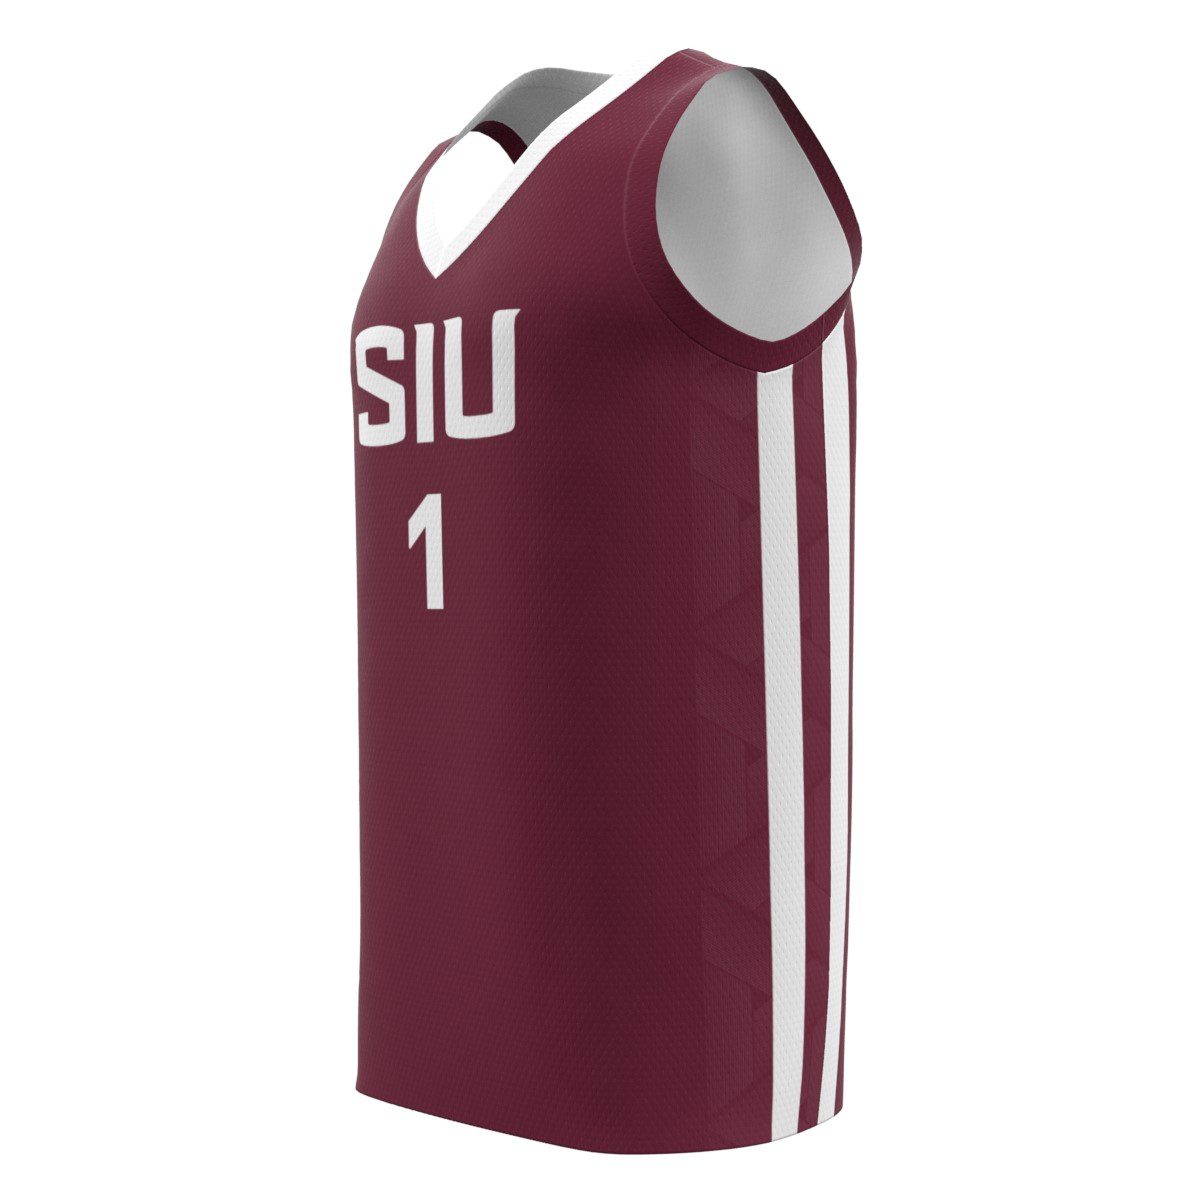 Marcus Domask SIU Replica Maroon Jersey Side